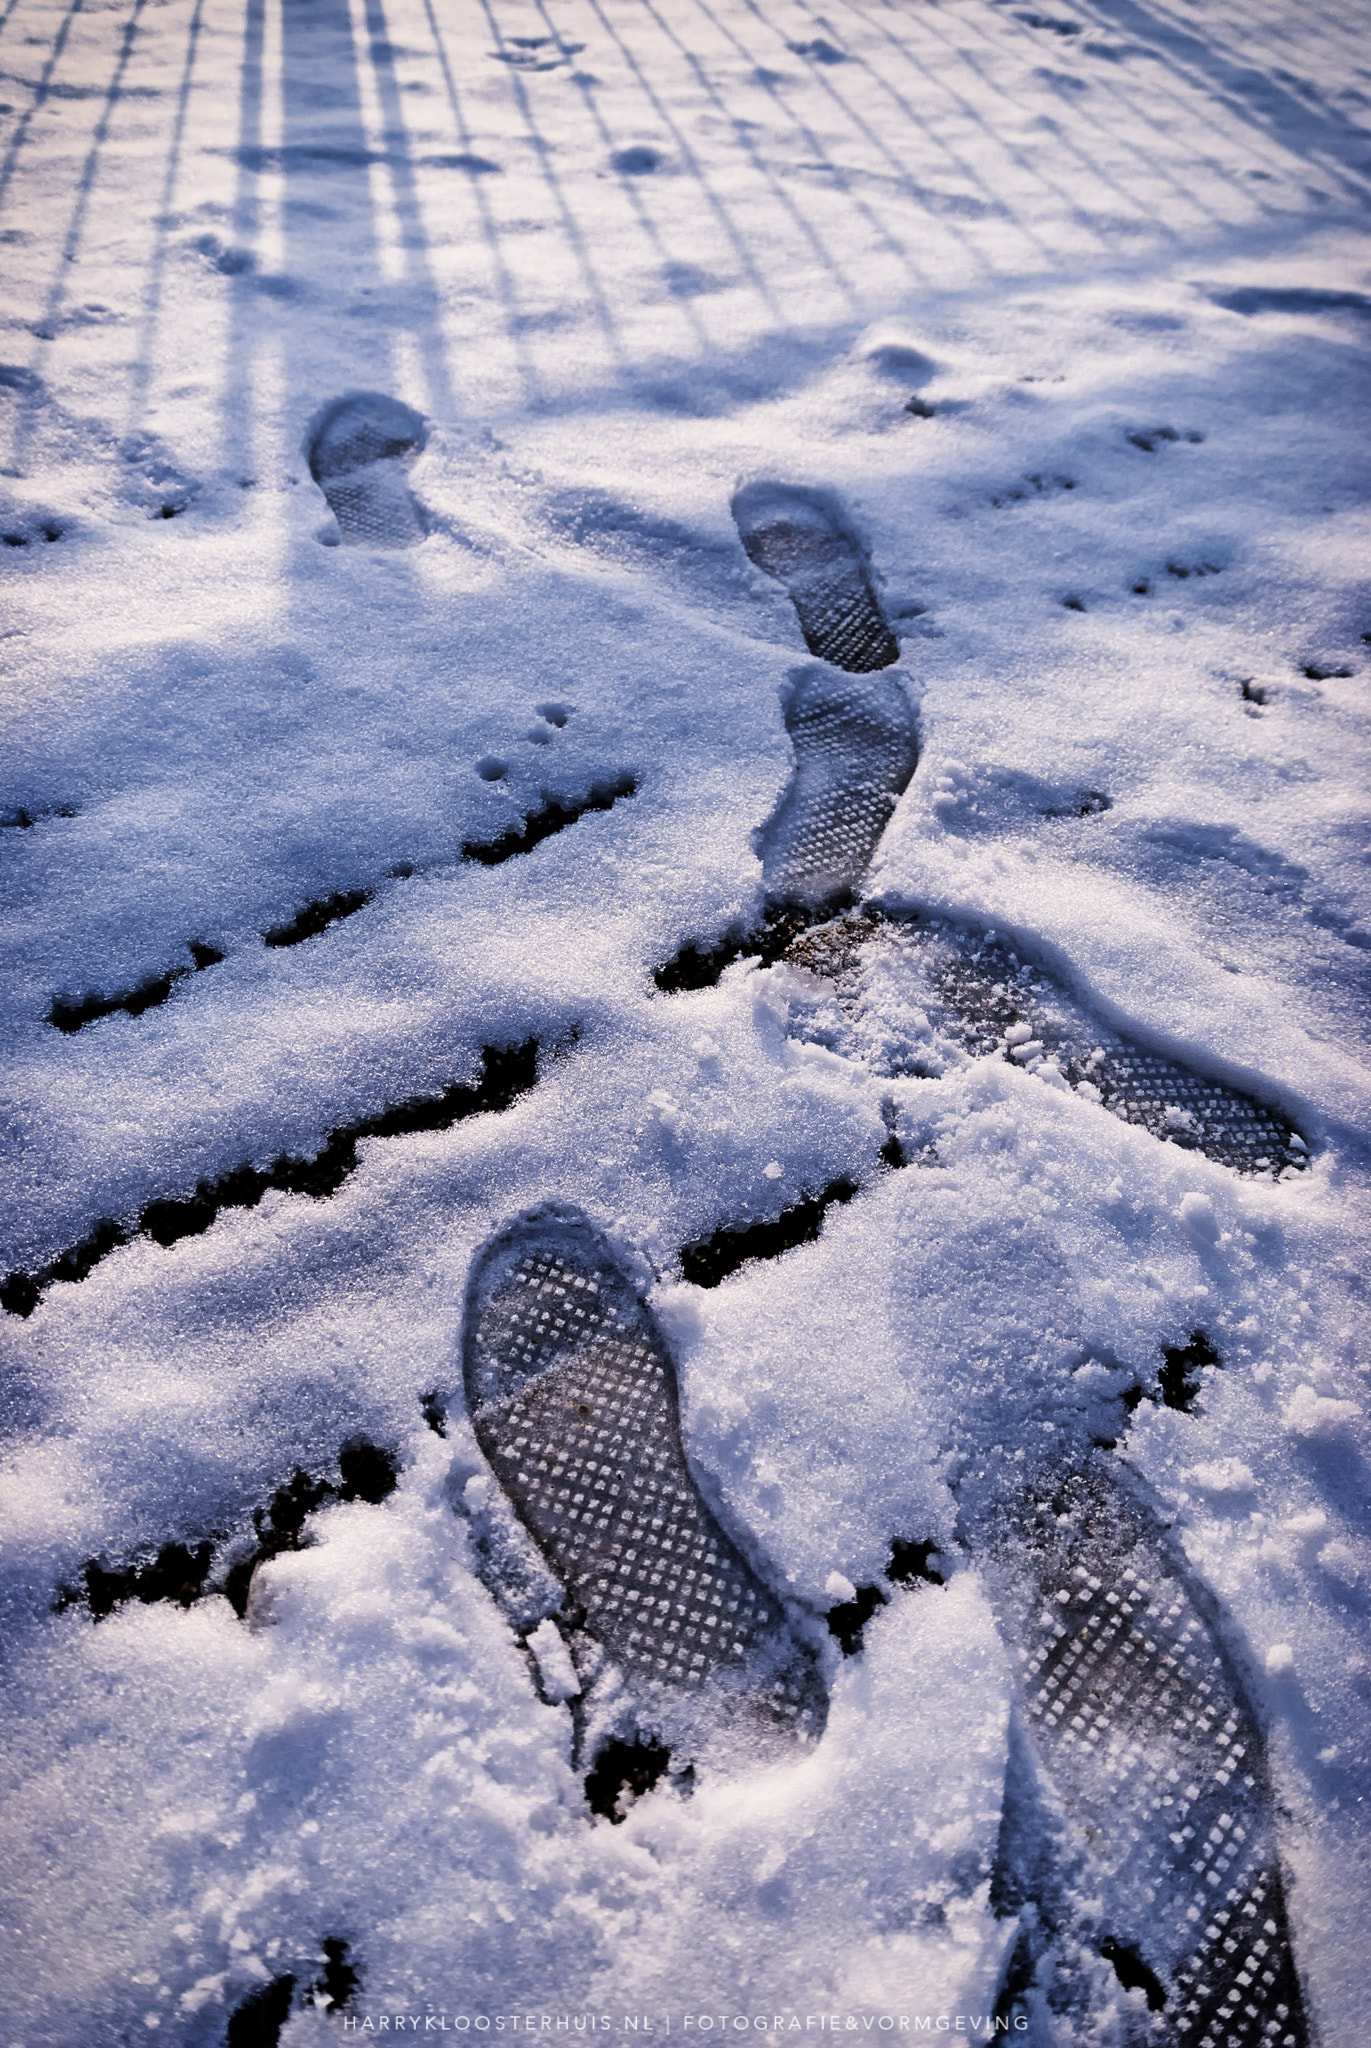 Nikon D80 + Tamron SP AF 17-50mm F2.8 XR Di II VC LD Aspherical (IF) sample photo. Snowy steps photography